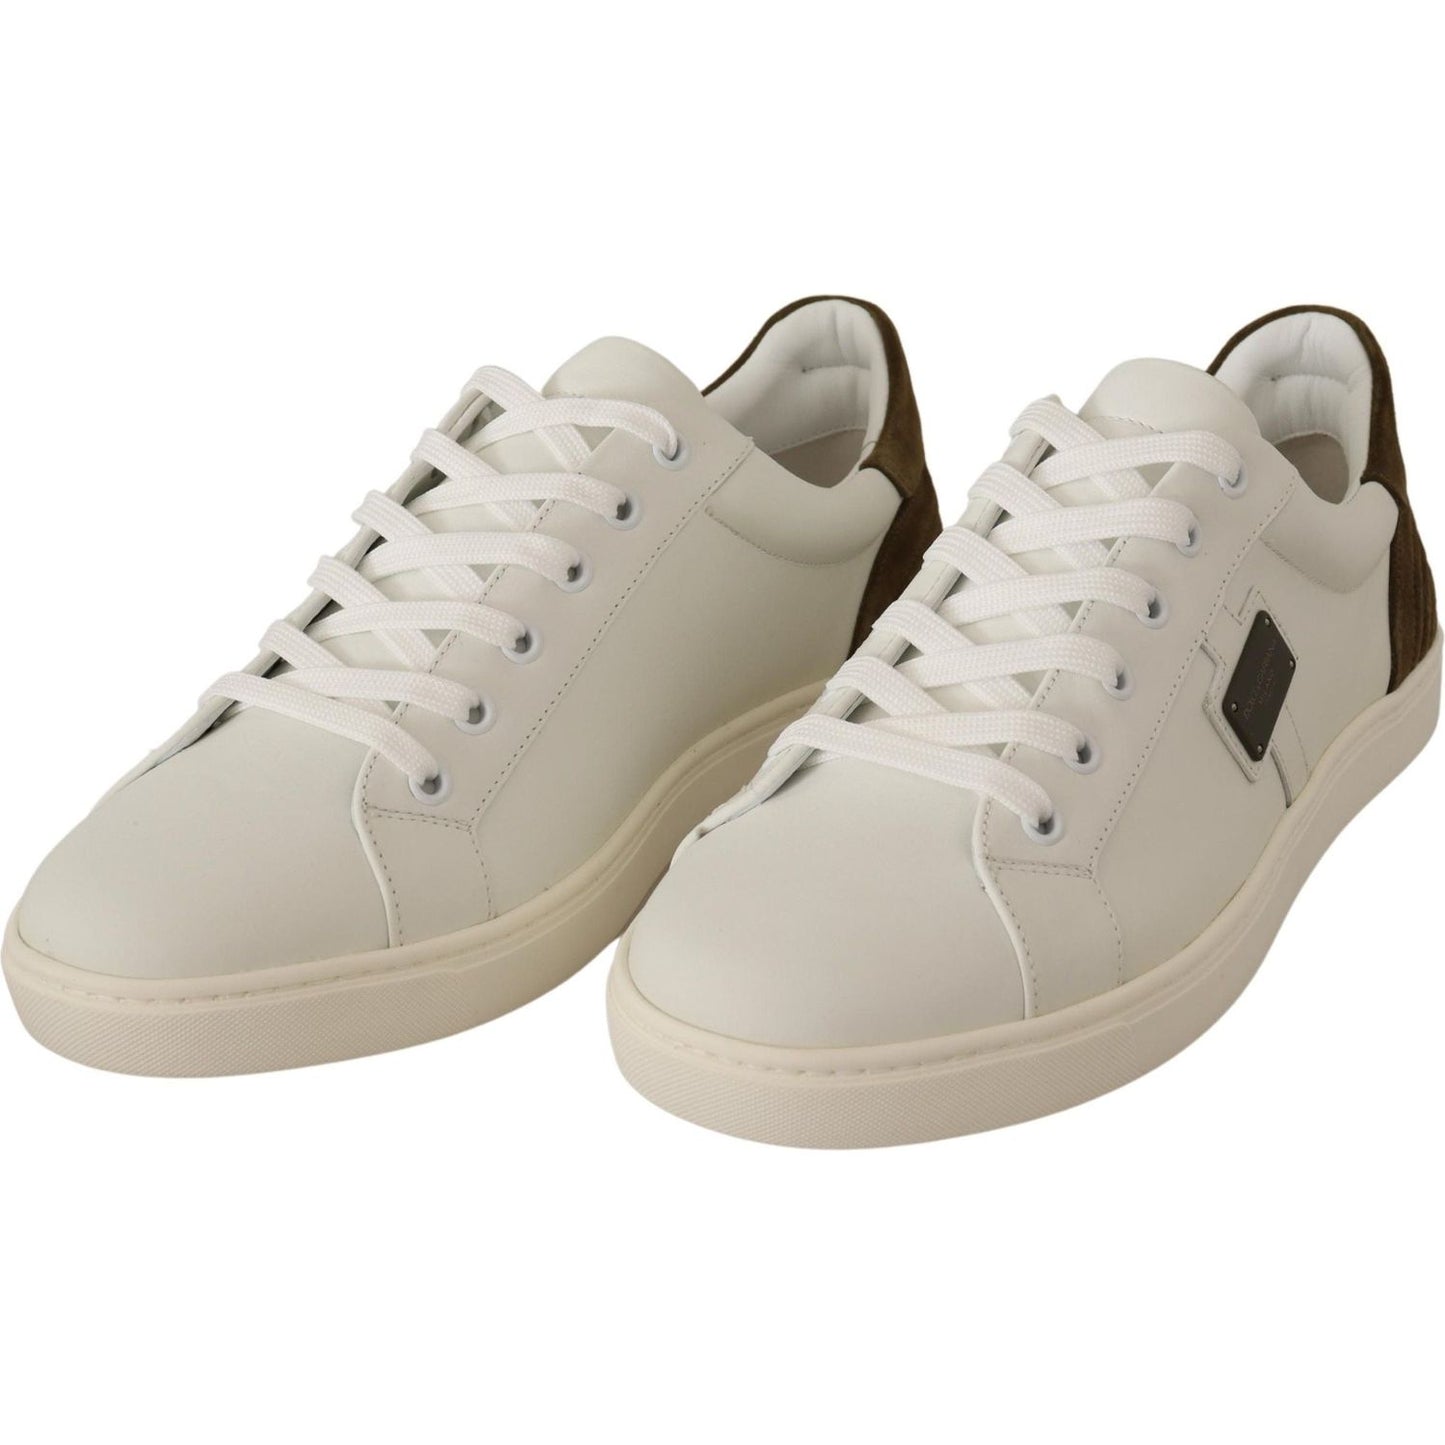 Dolce & Gabbana Chic White Leather Sneakers for Men white-suede-leather-mens-low-tops-sneakers